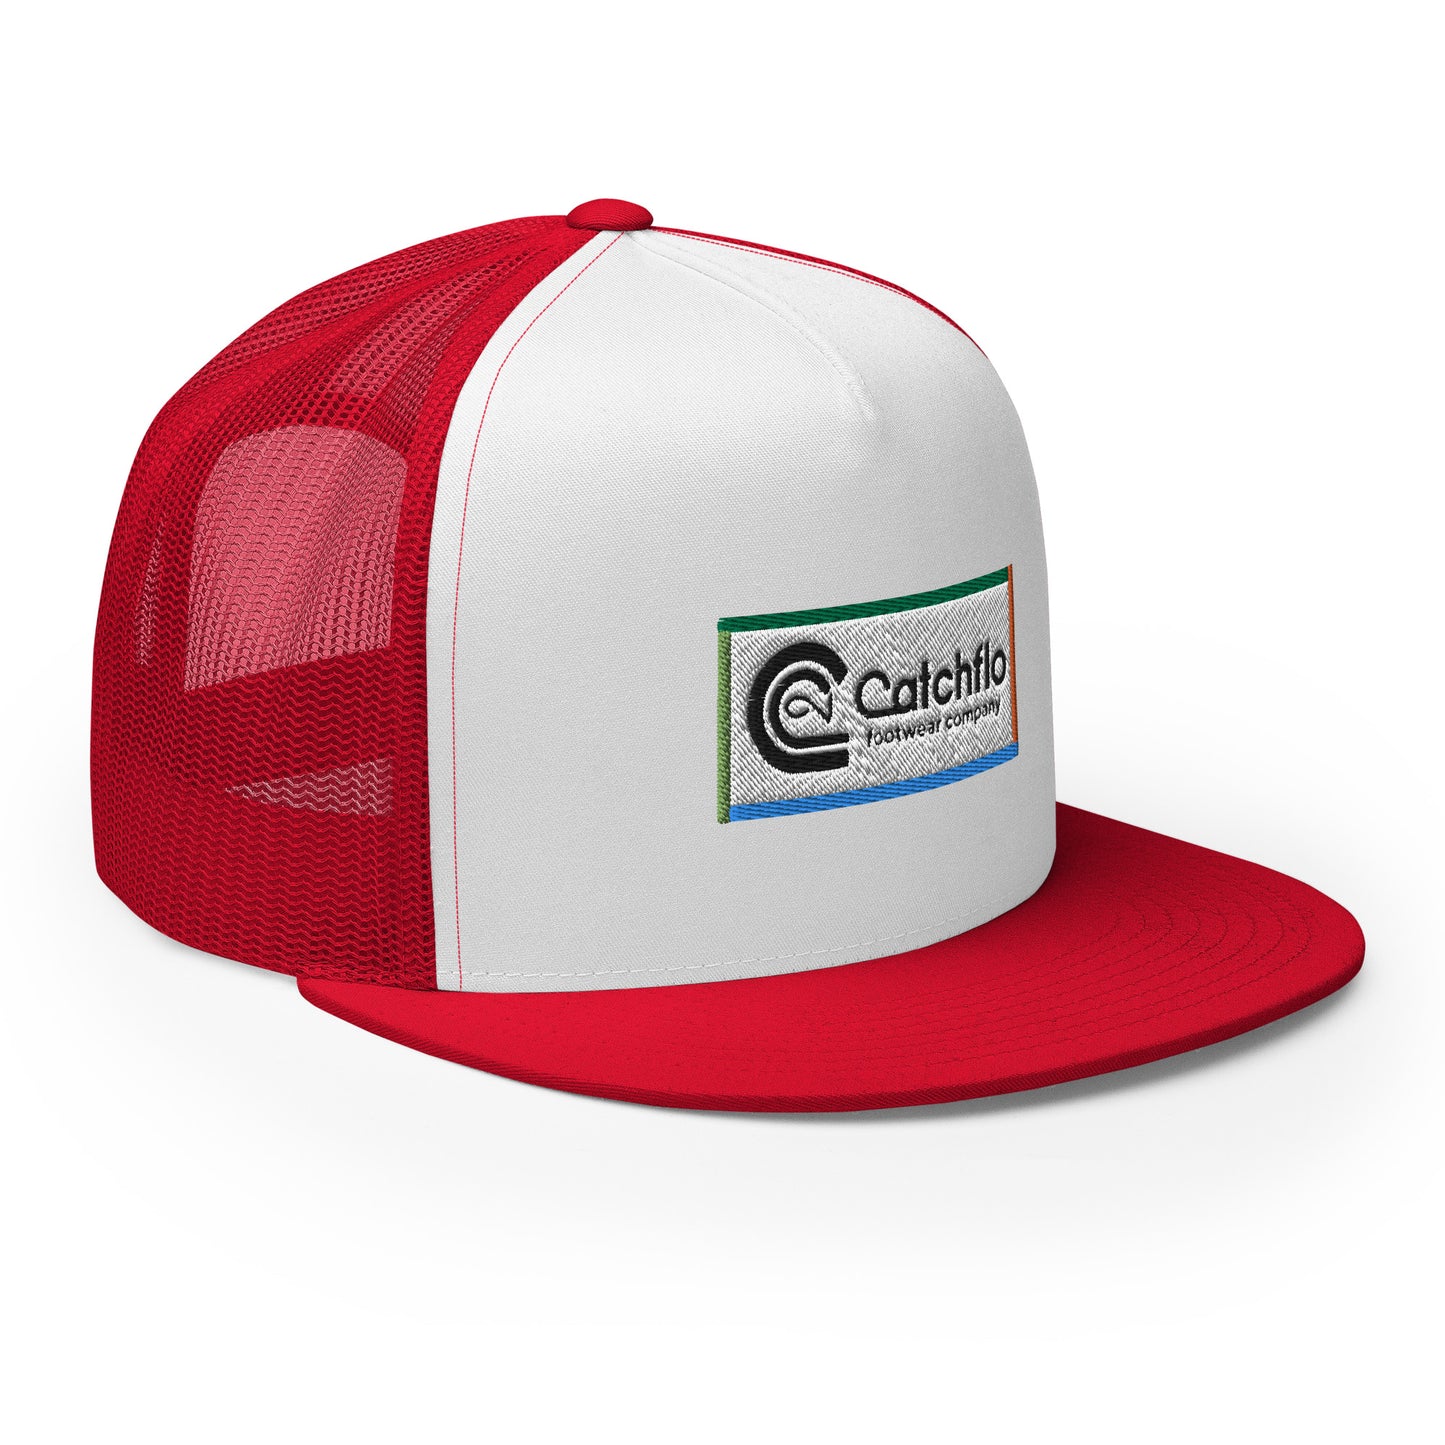 Catchflo Footwear Company Flat Bill Trucker Hat (13 color choices)